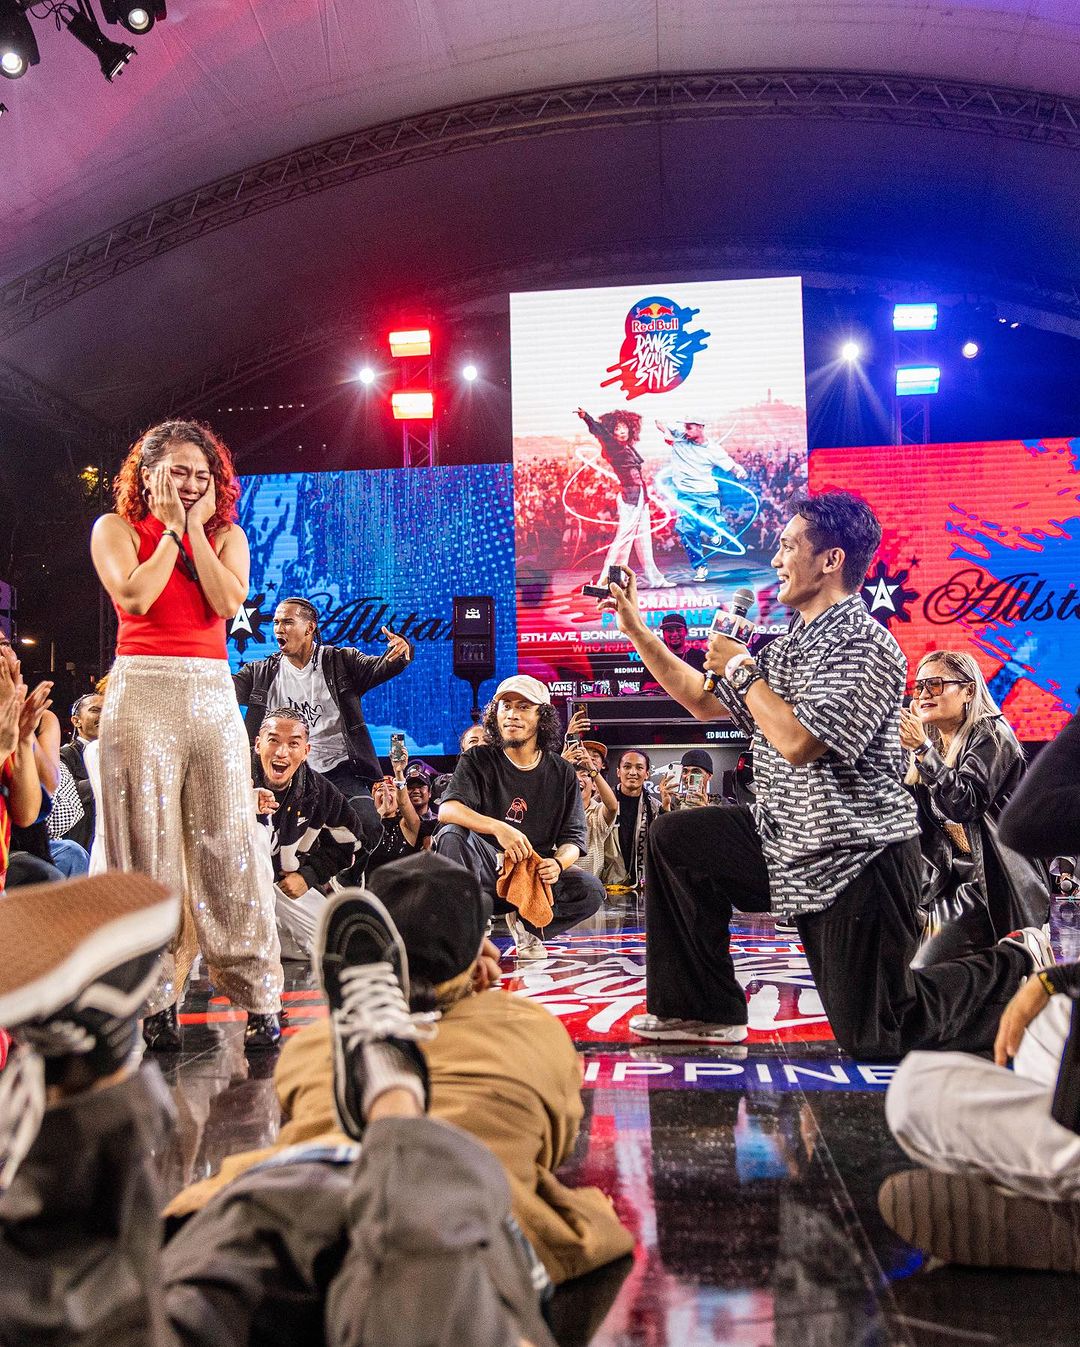 Keycee Velez' surprise marriage proposal in Red Bull Dance Your Style National Finals